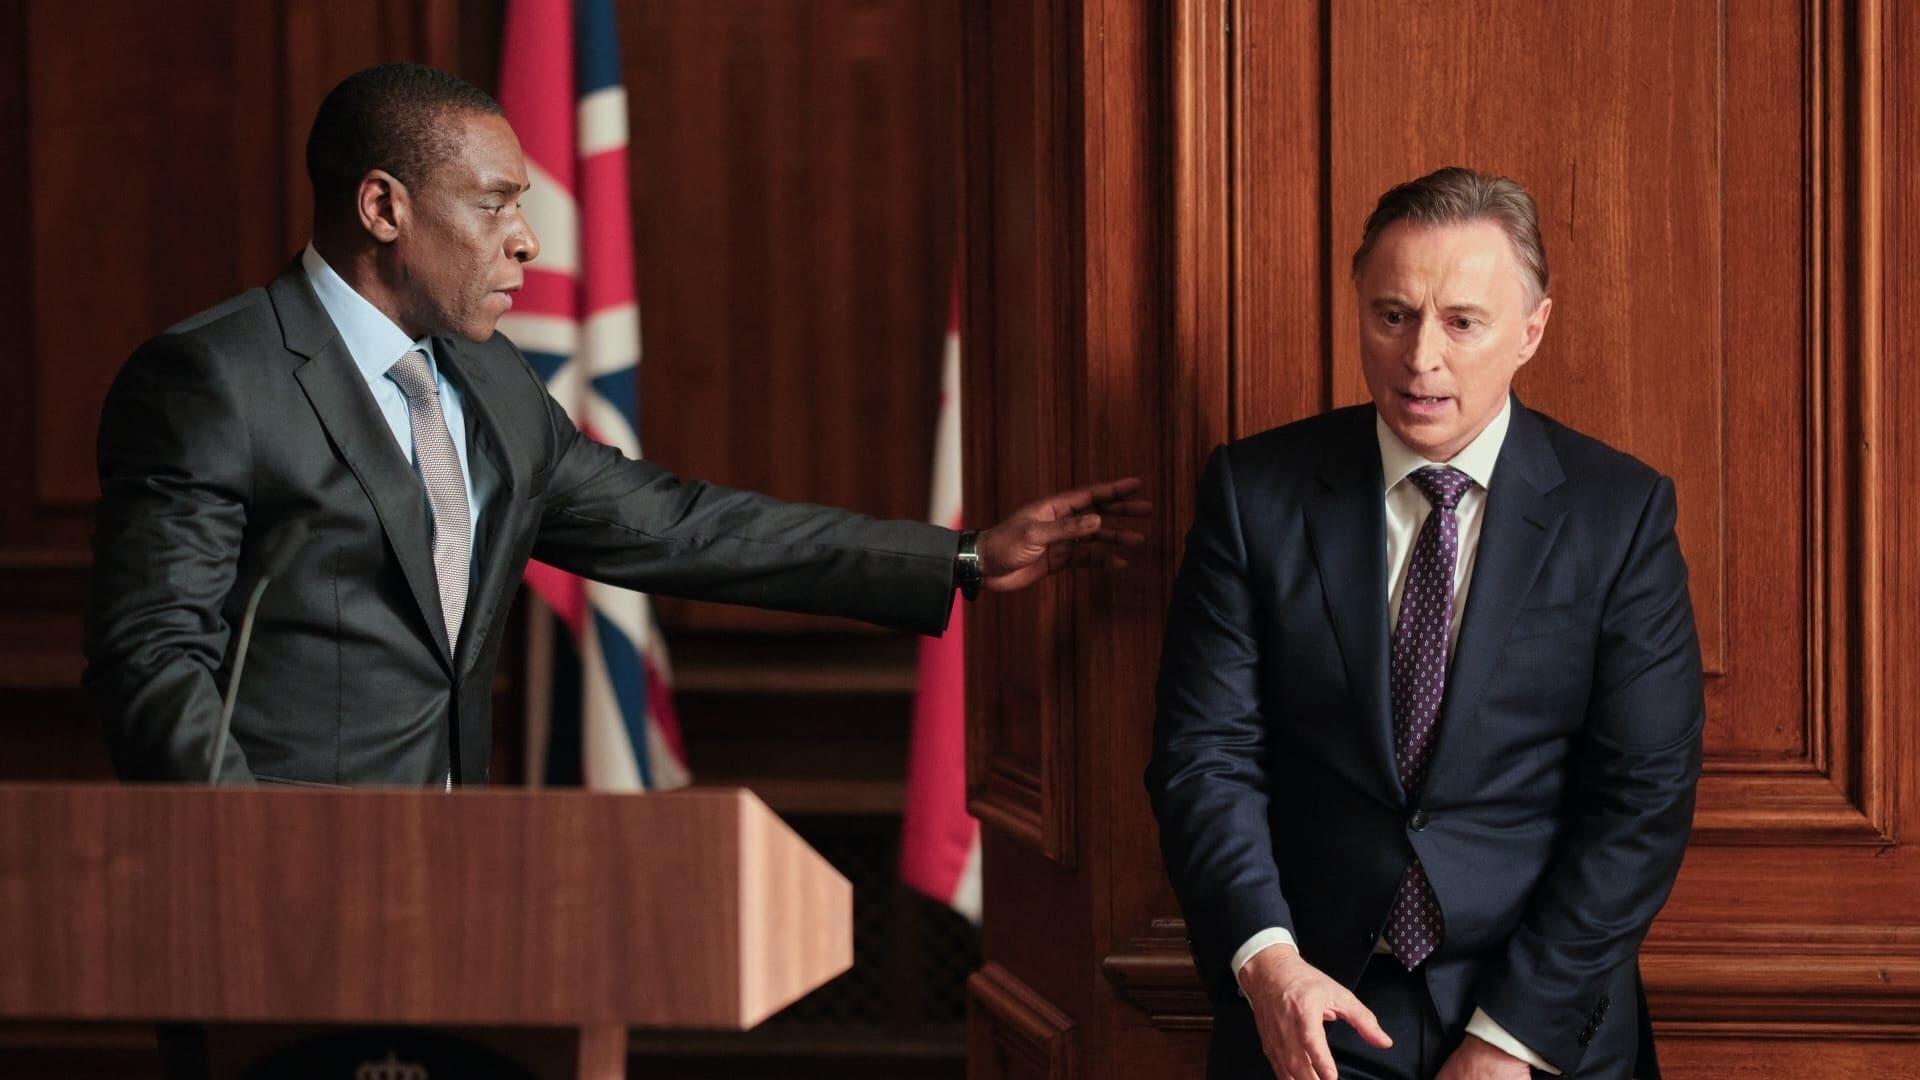 Joseph Obasi (Richard Pepple) and Robert Sutherland (Robert Carlyle). Credit: Courtesy of © 2021 New Pictures Ltd